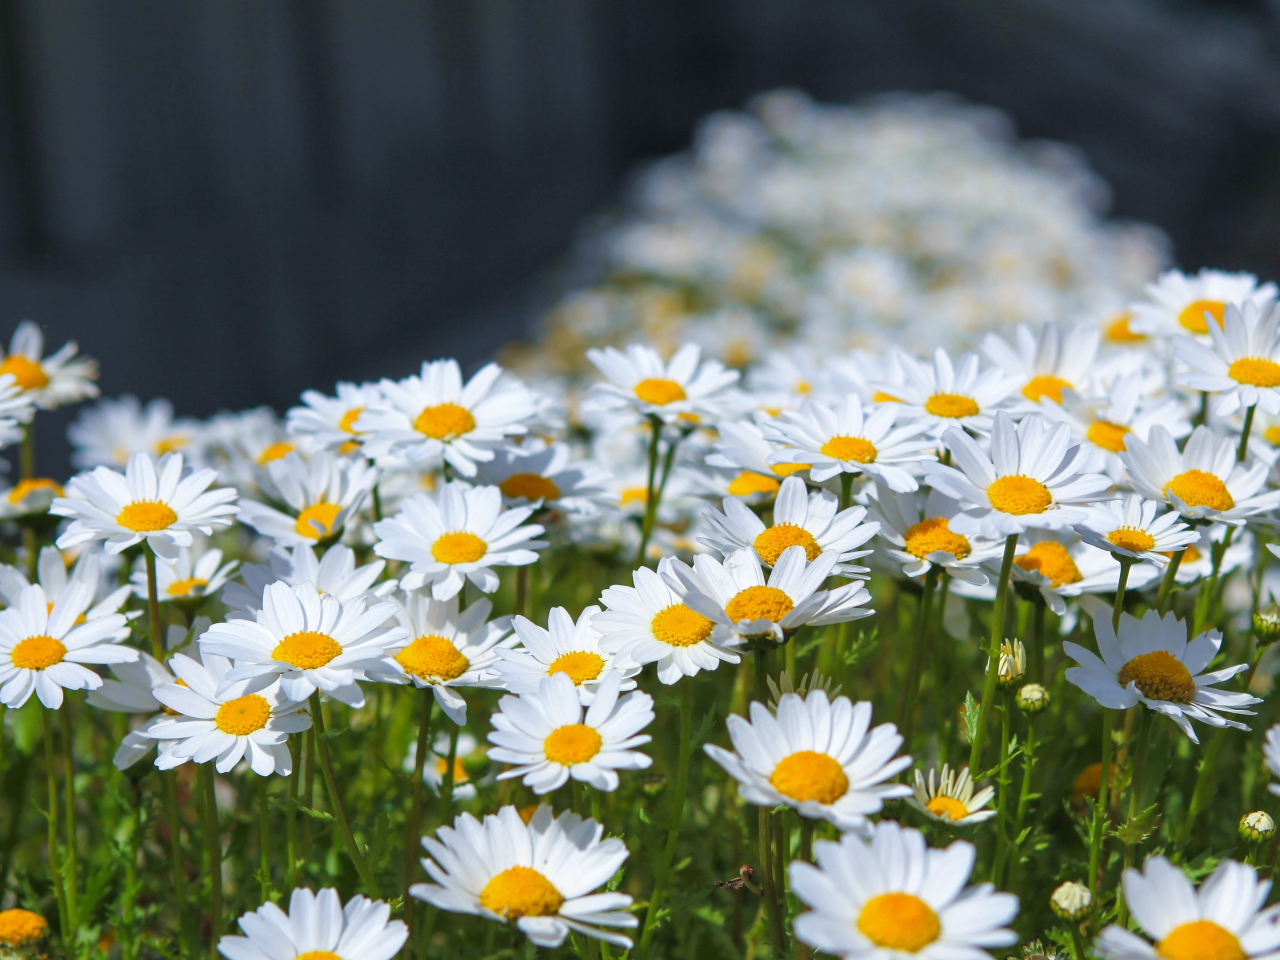 Meadow, spring, flowers, white daisy, 1280x960 wallpaper